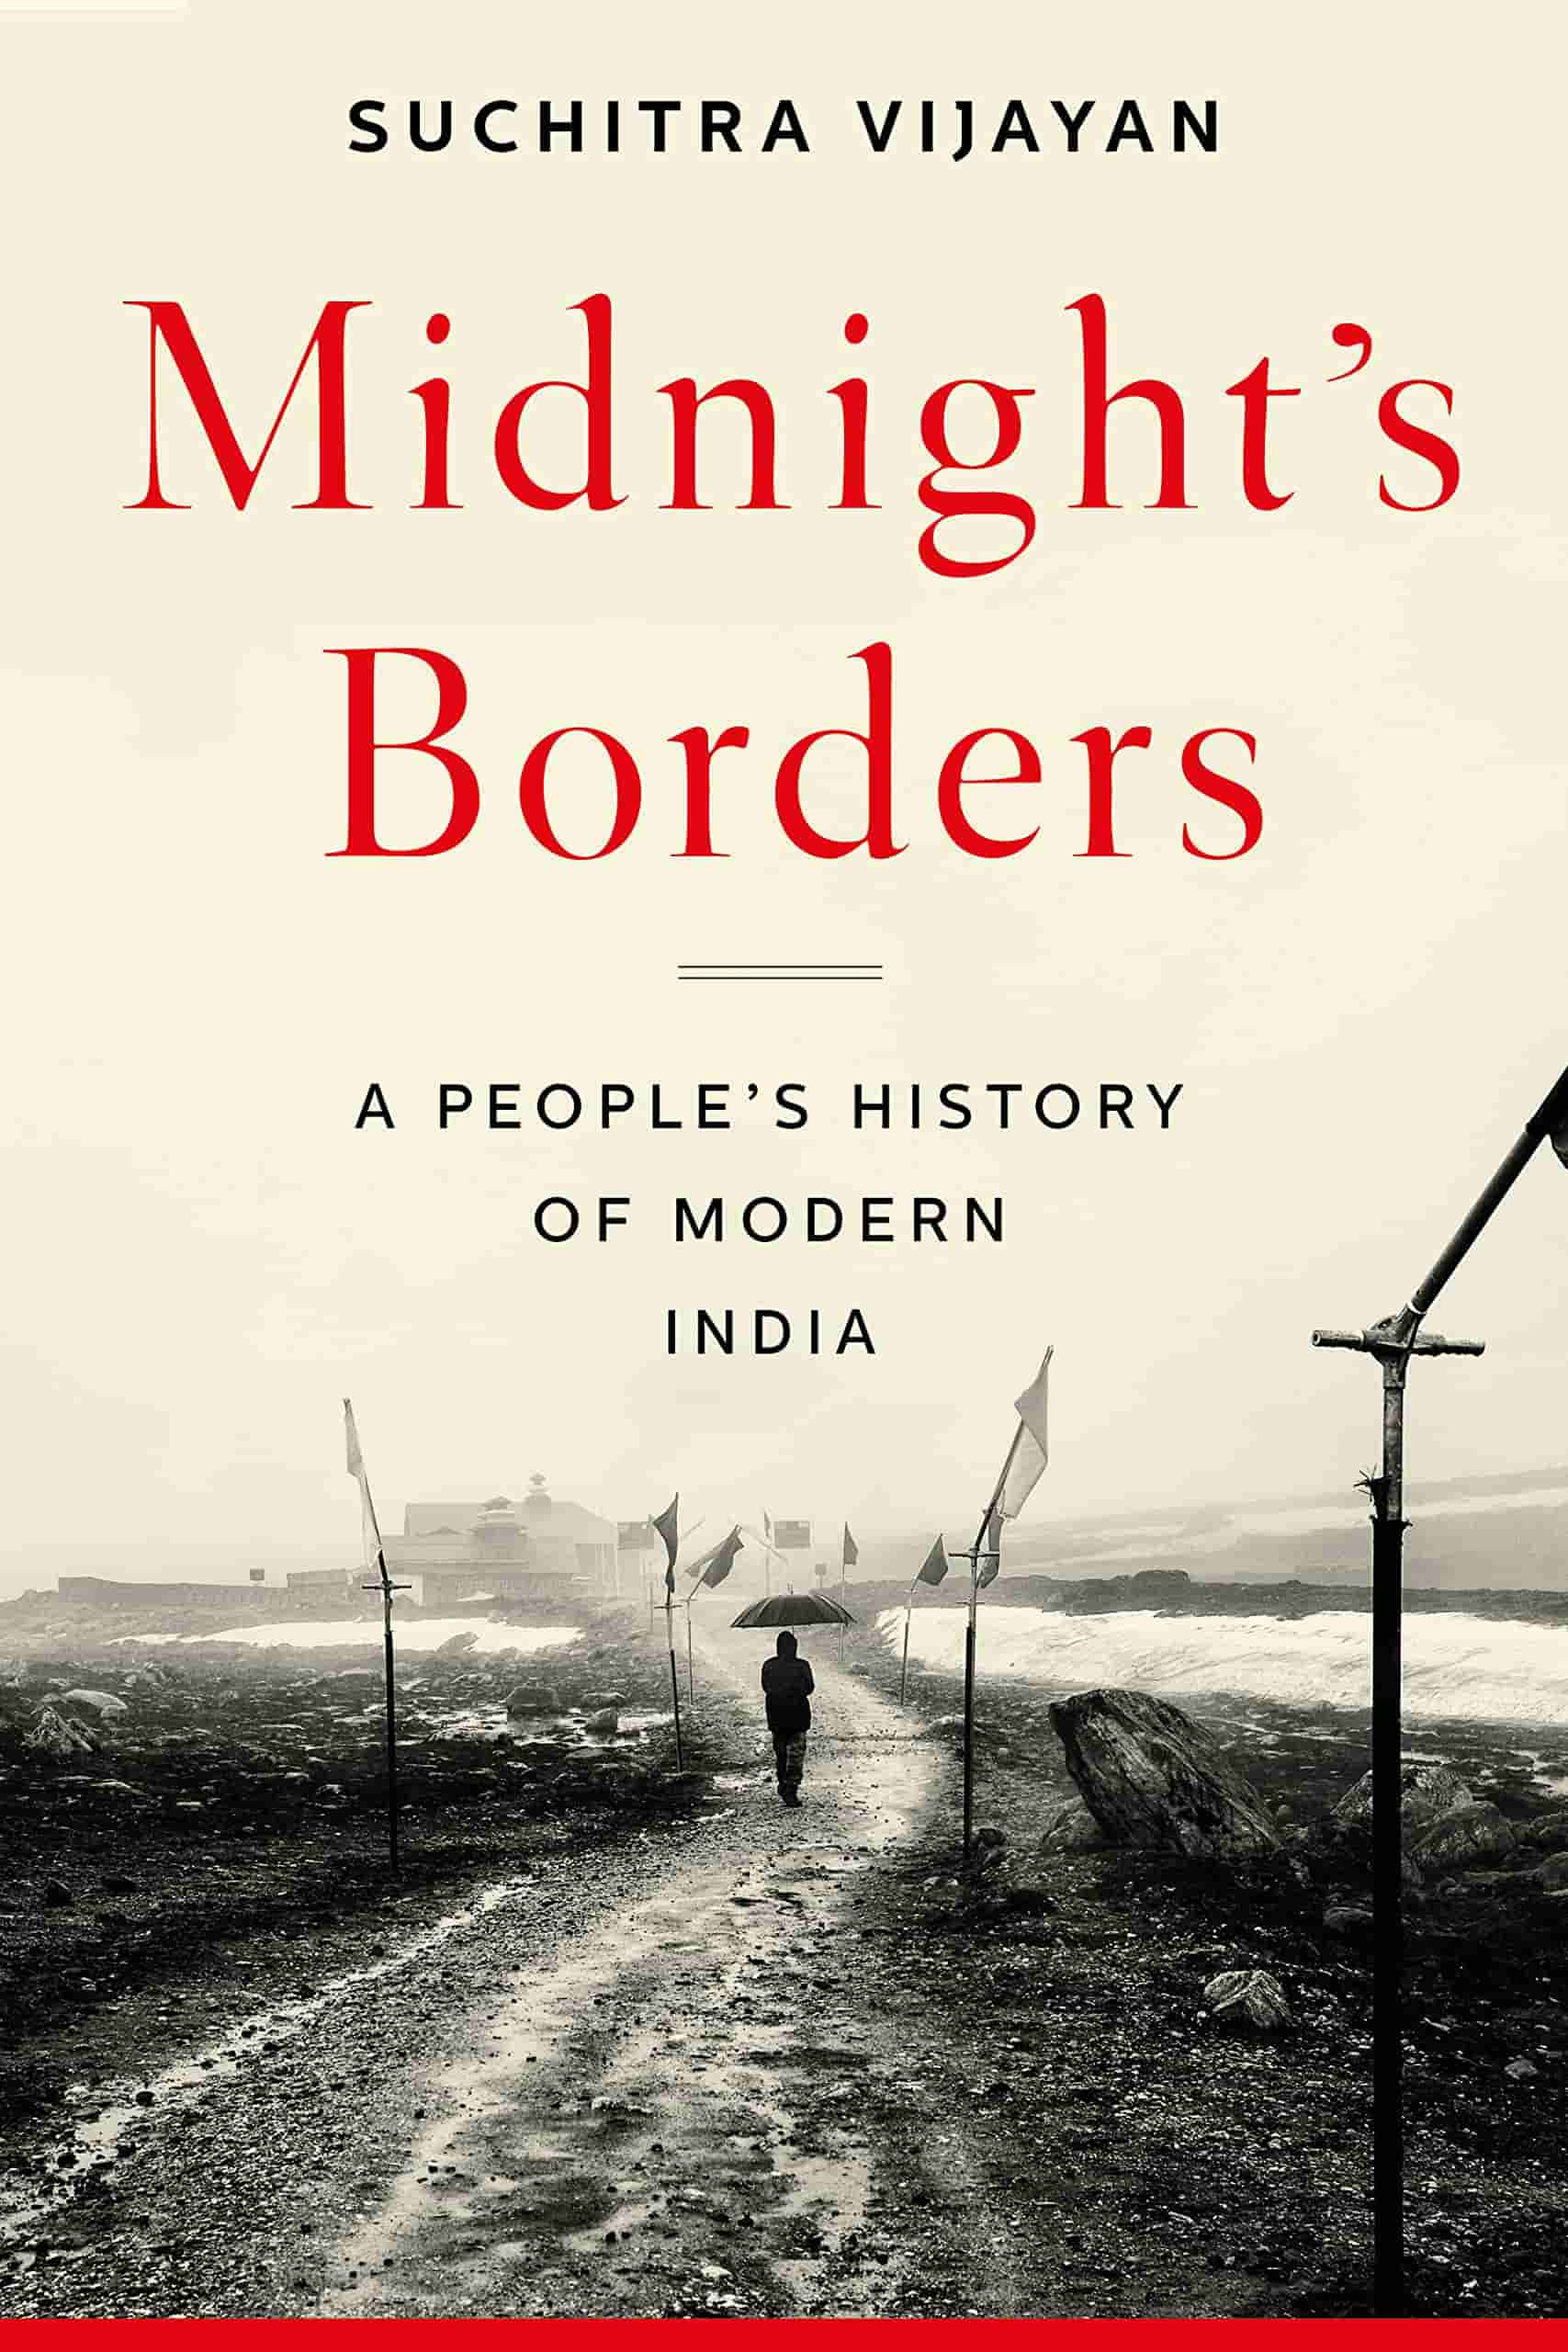 Midnight's Borders: A People's History of Modern India by Suchitra Vijayan